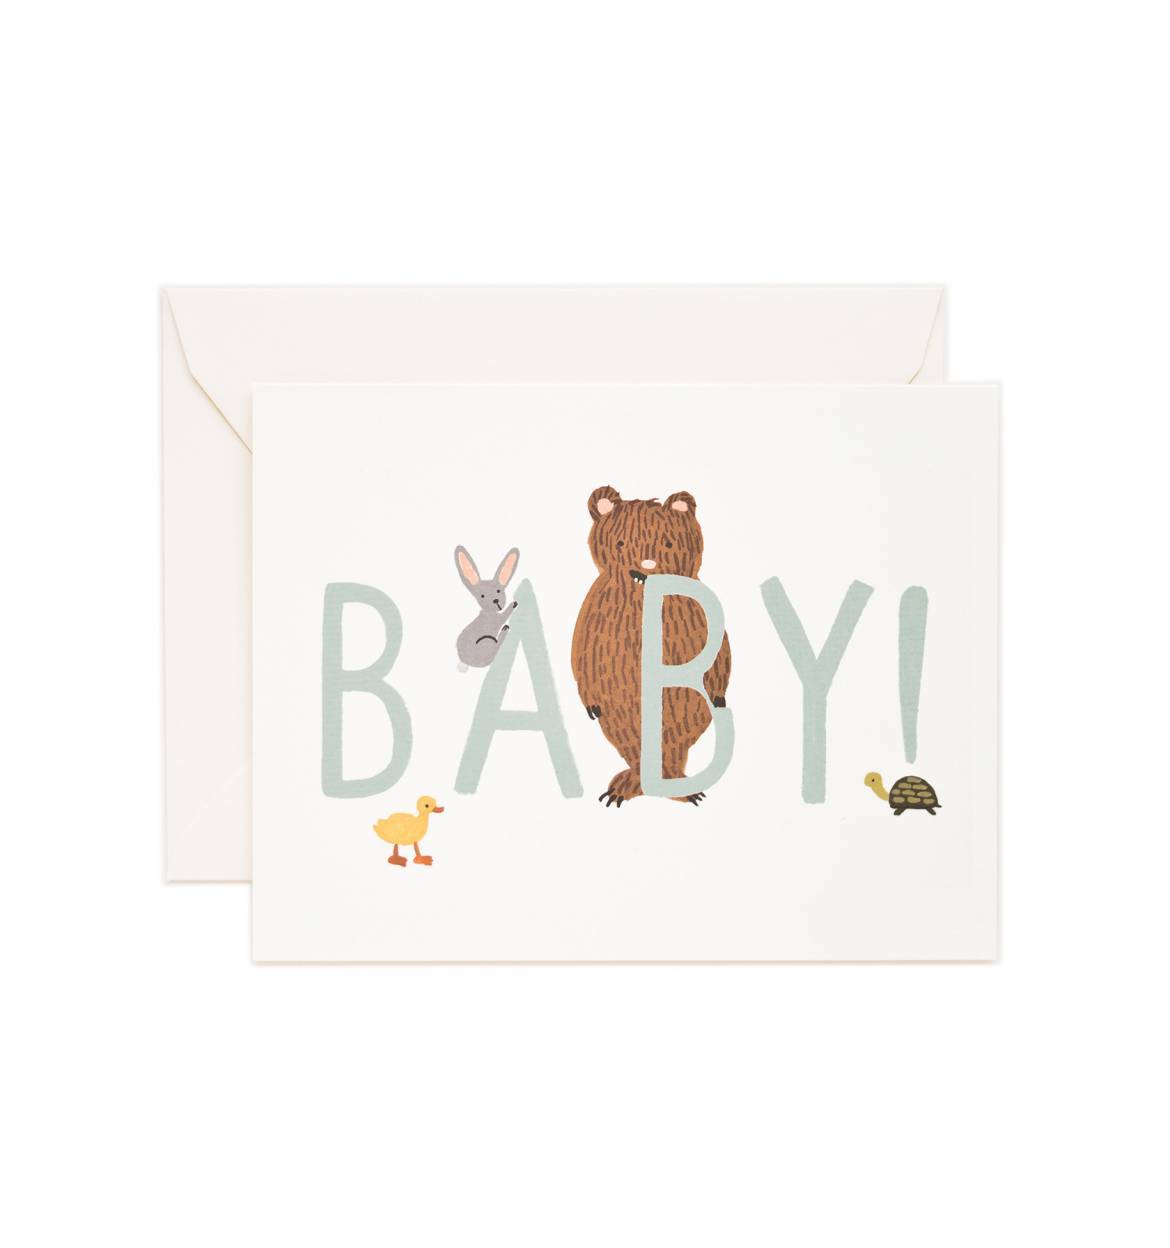 New Baby Card in Mint